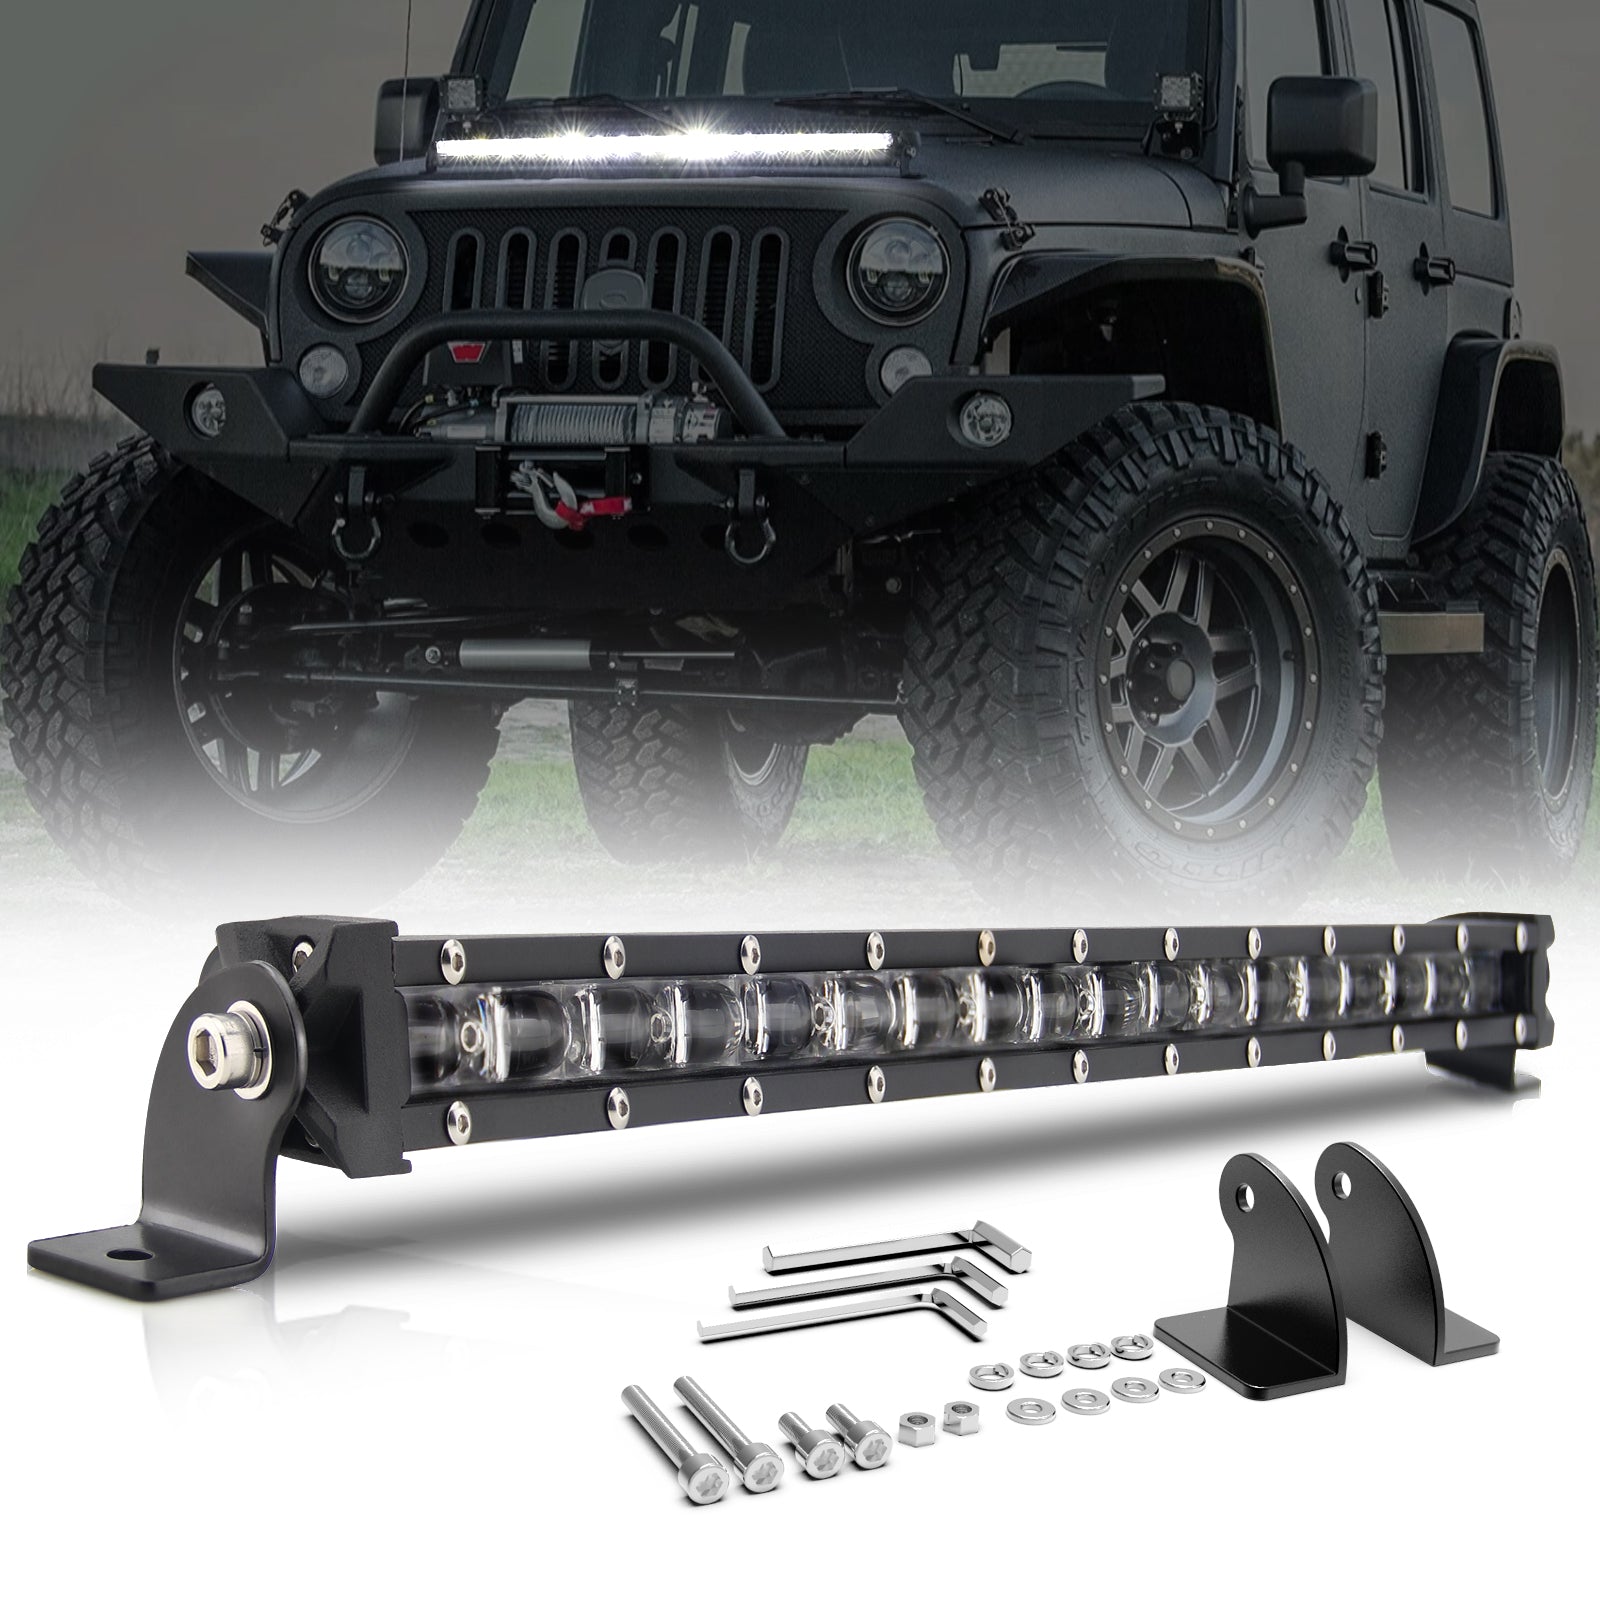 COLIGHT 52inch Striker Series LED Round Driving Linkable Light Bar